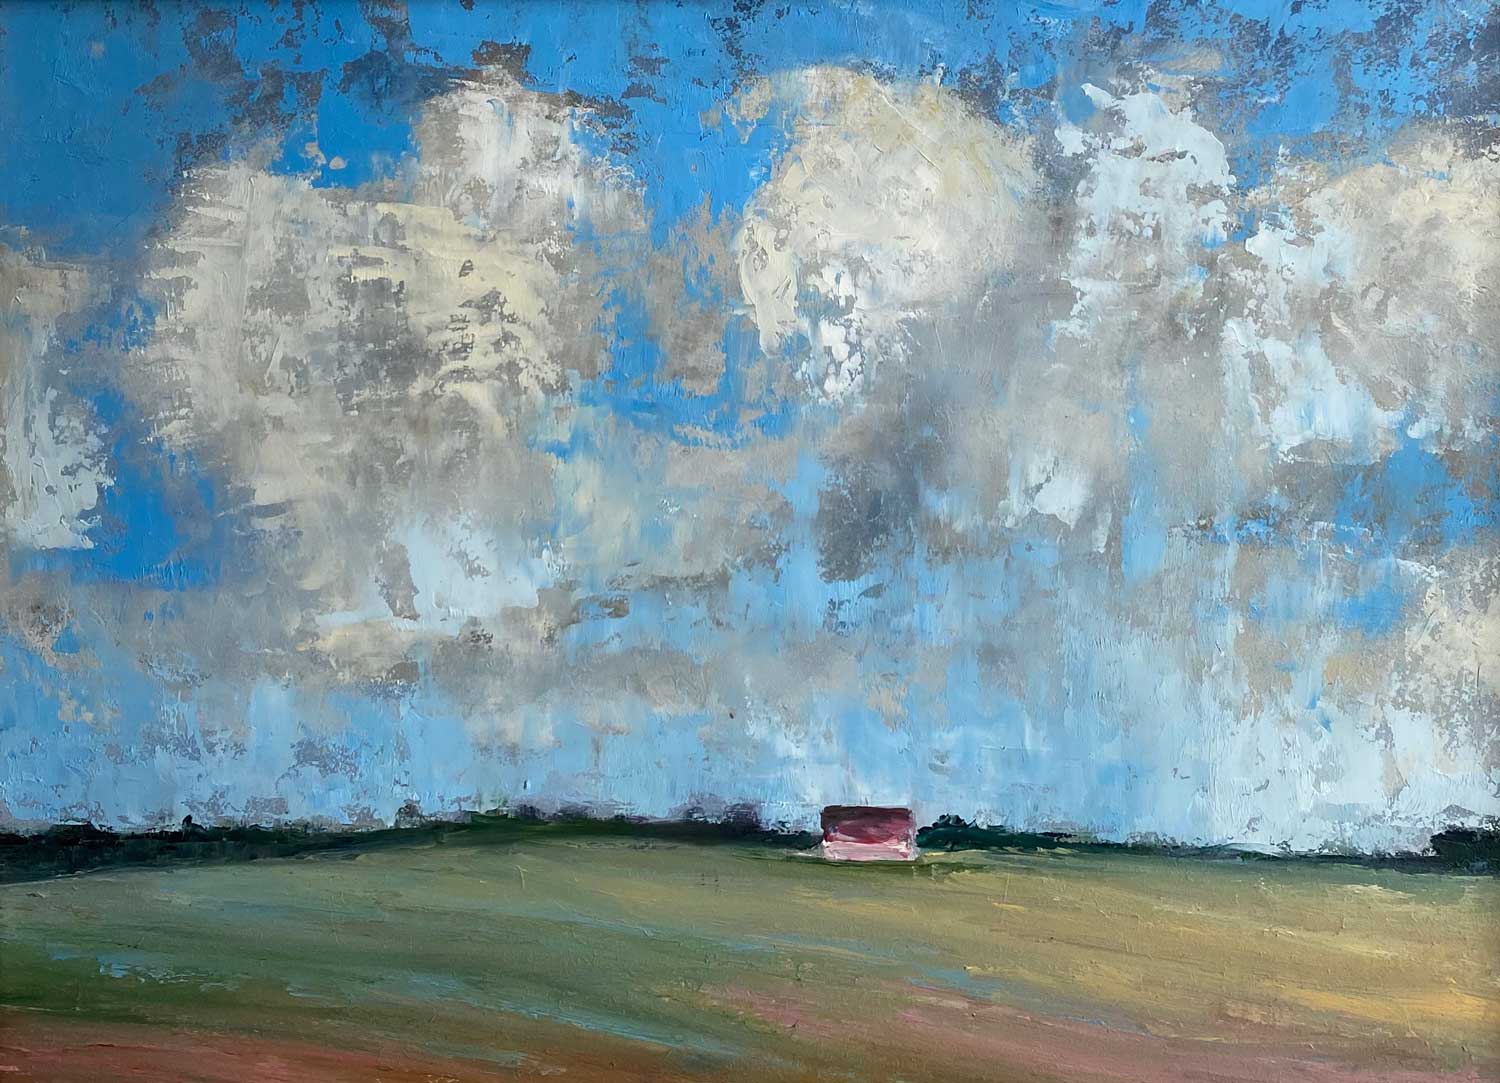 The Red Shed beneath the rolling clouds by Irish artist Emily McCormack